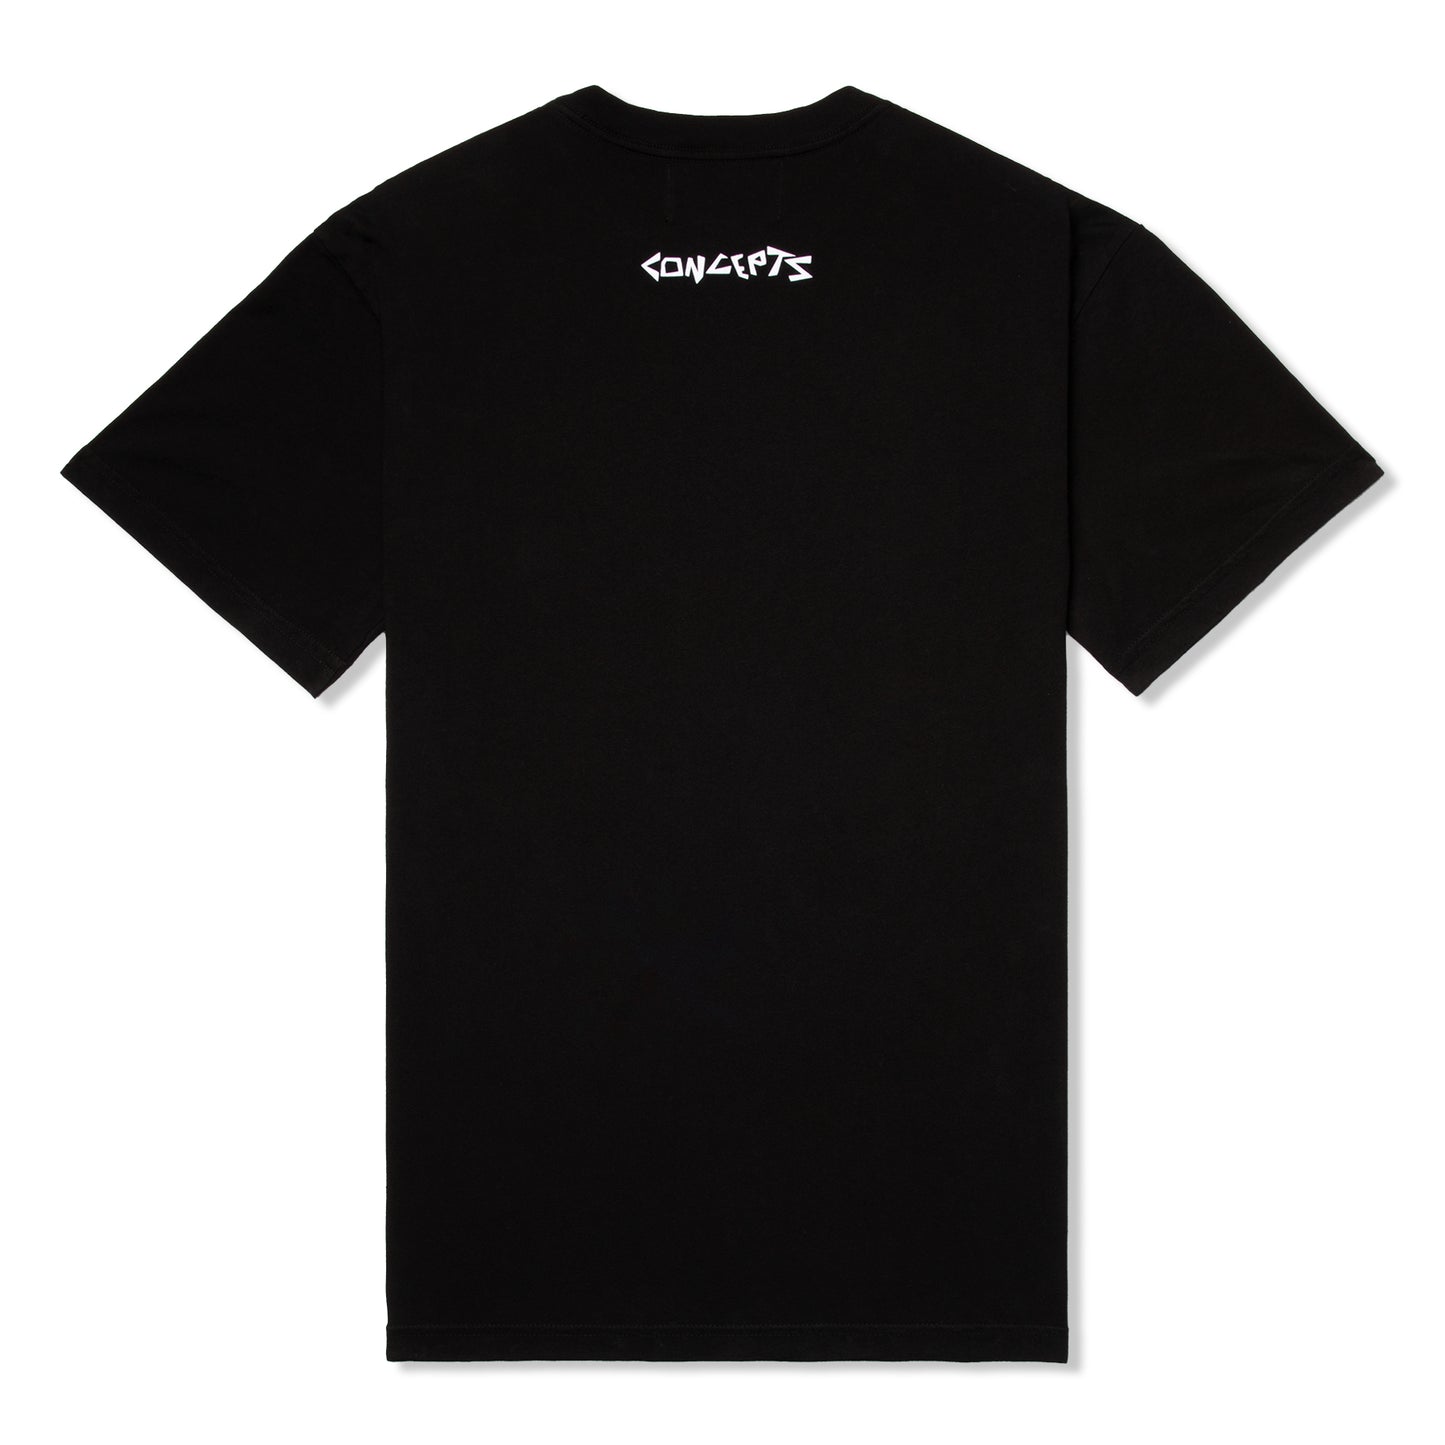 Concepts Too Much Pressure Tee (Black)